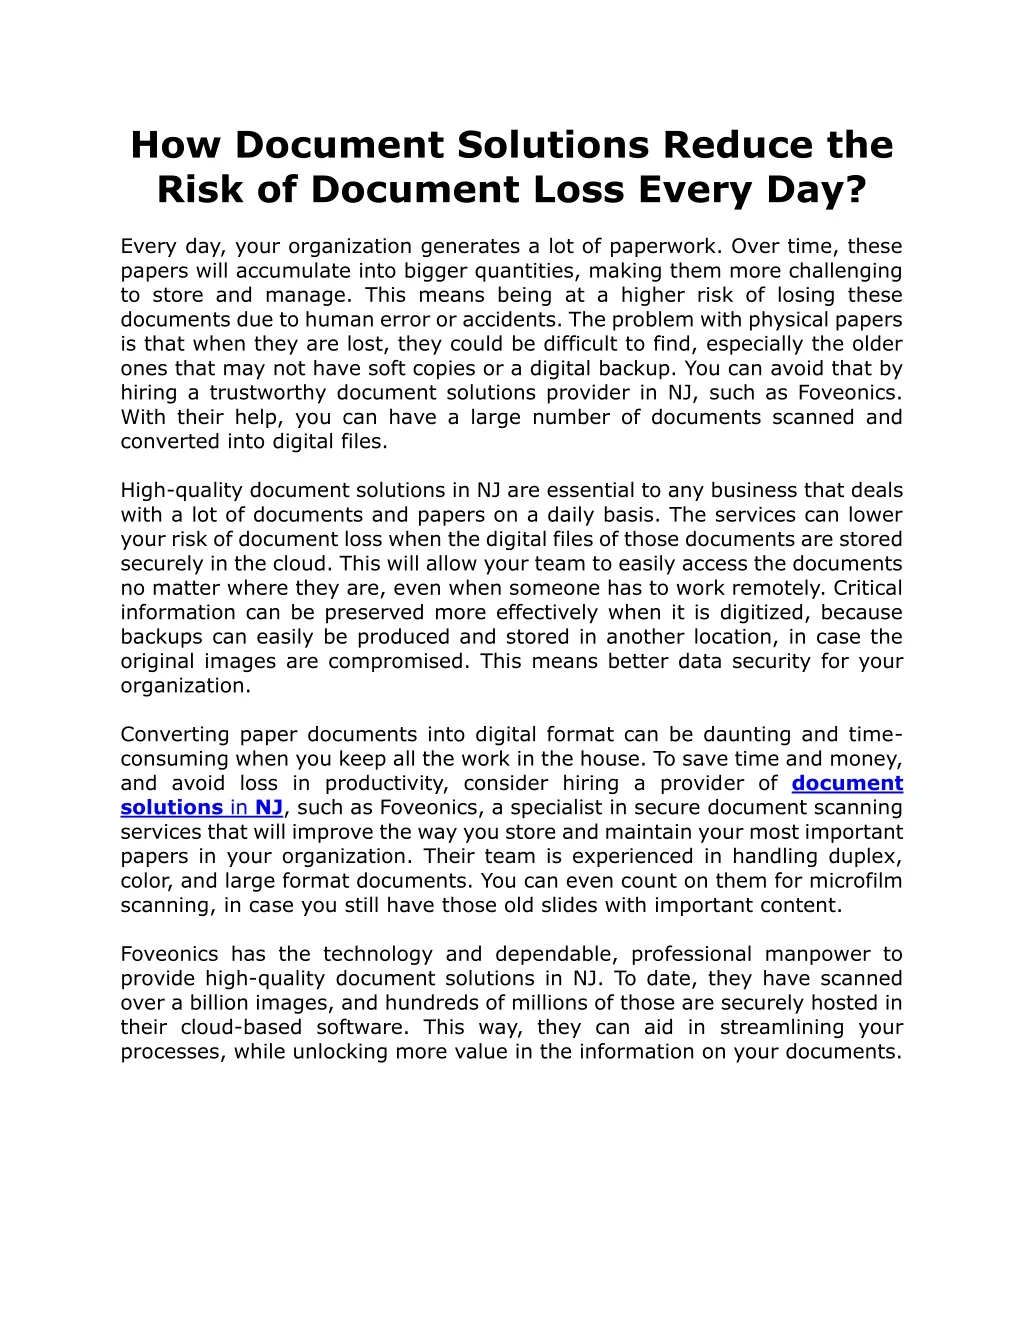 how document solutions reduce the risk